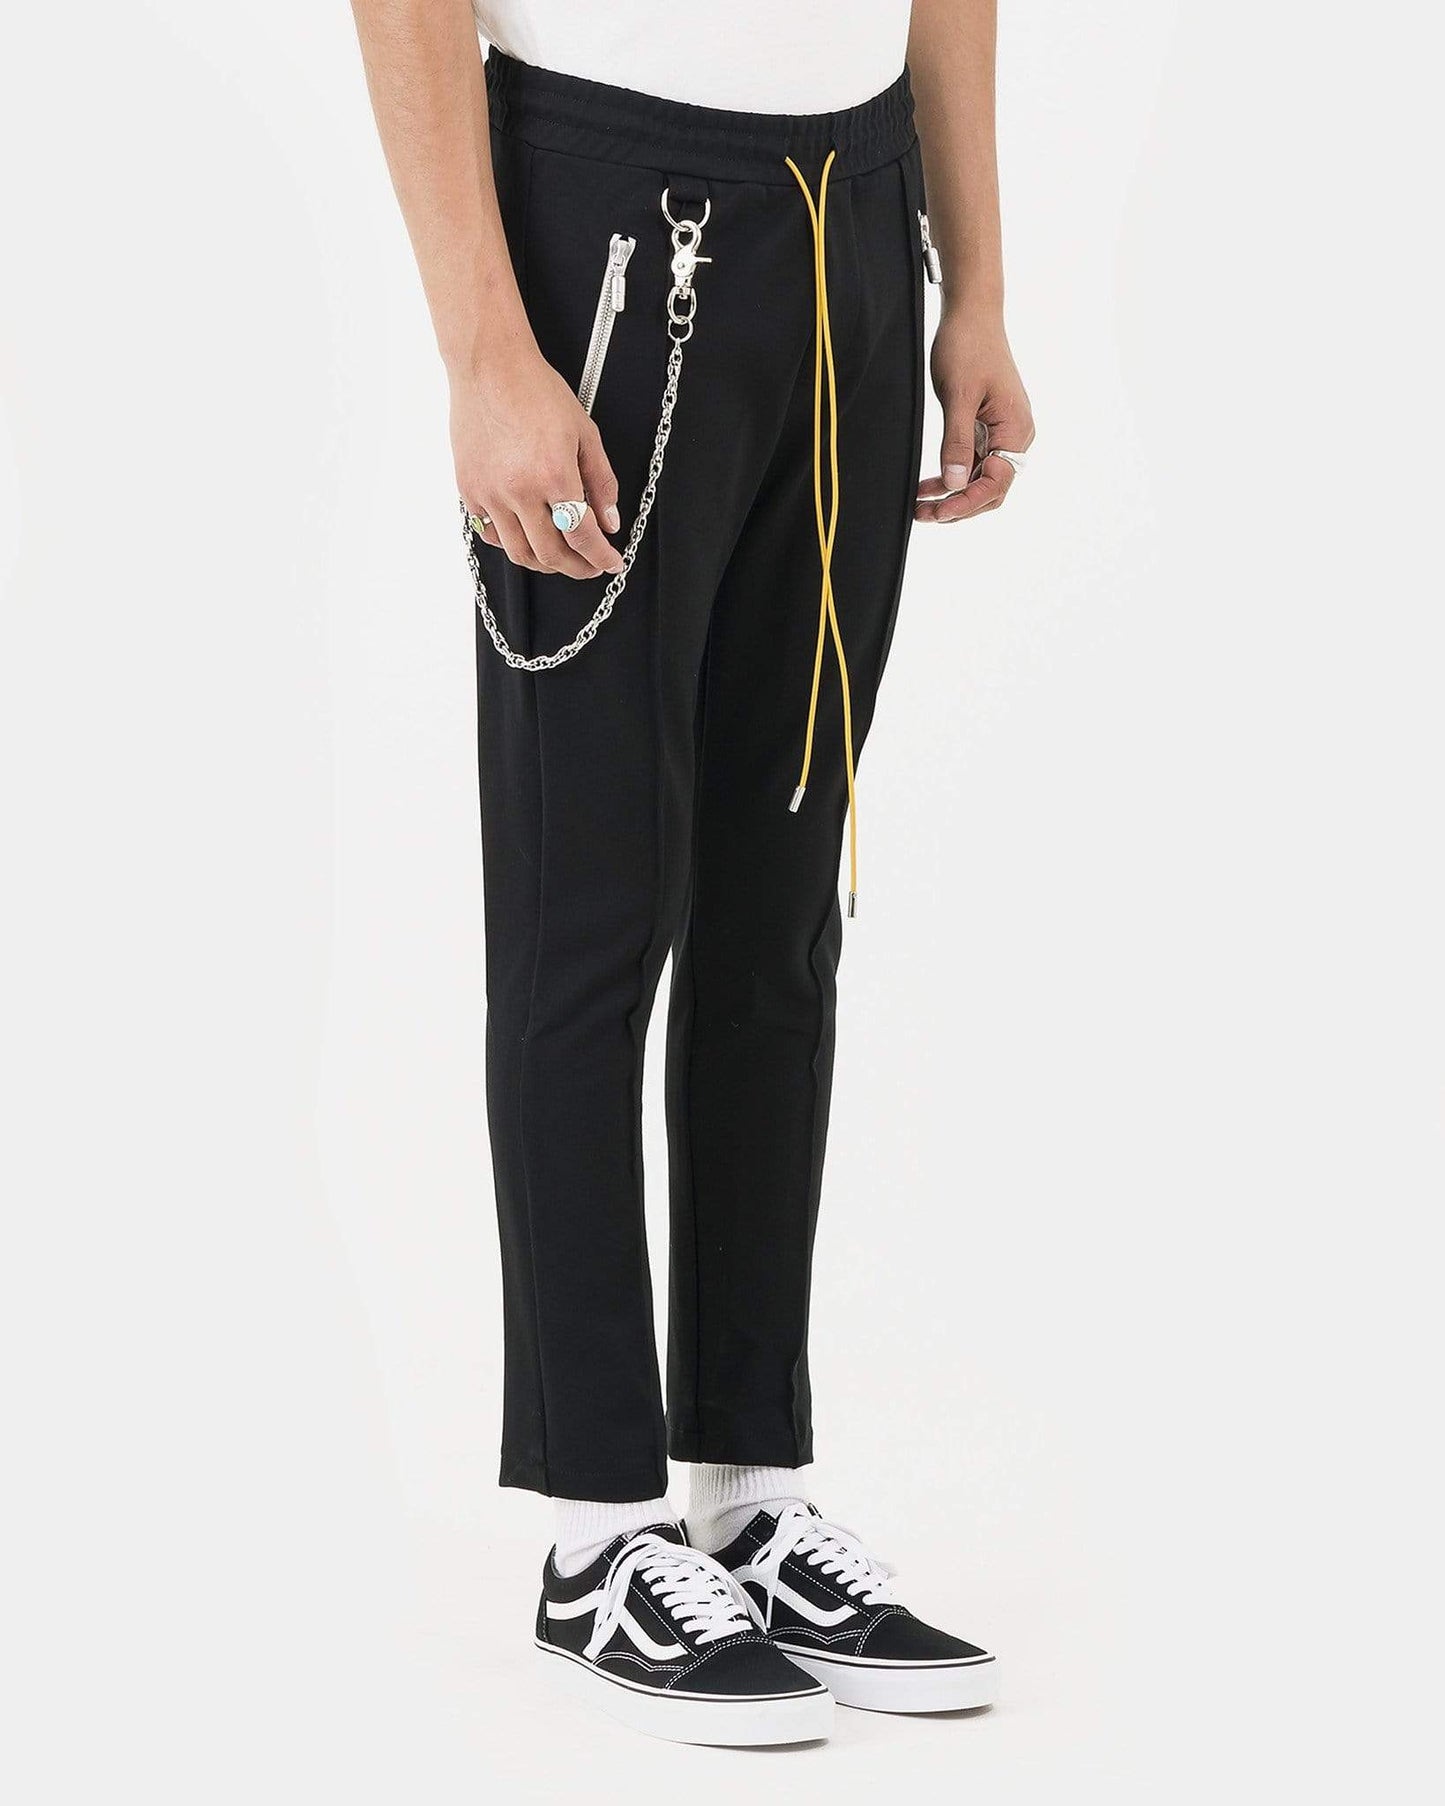 Rhude Men's Pants Traxedo in Black with Chain